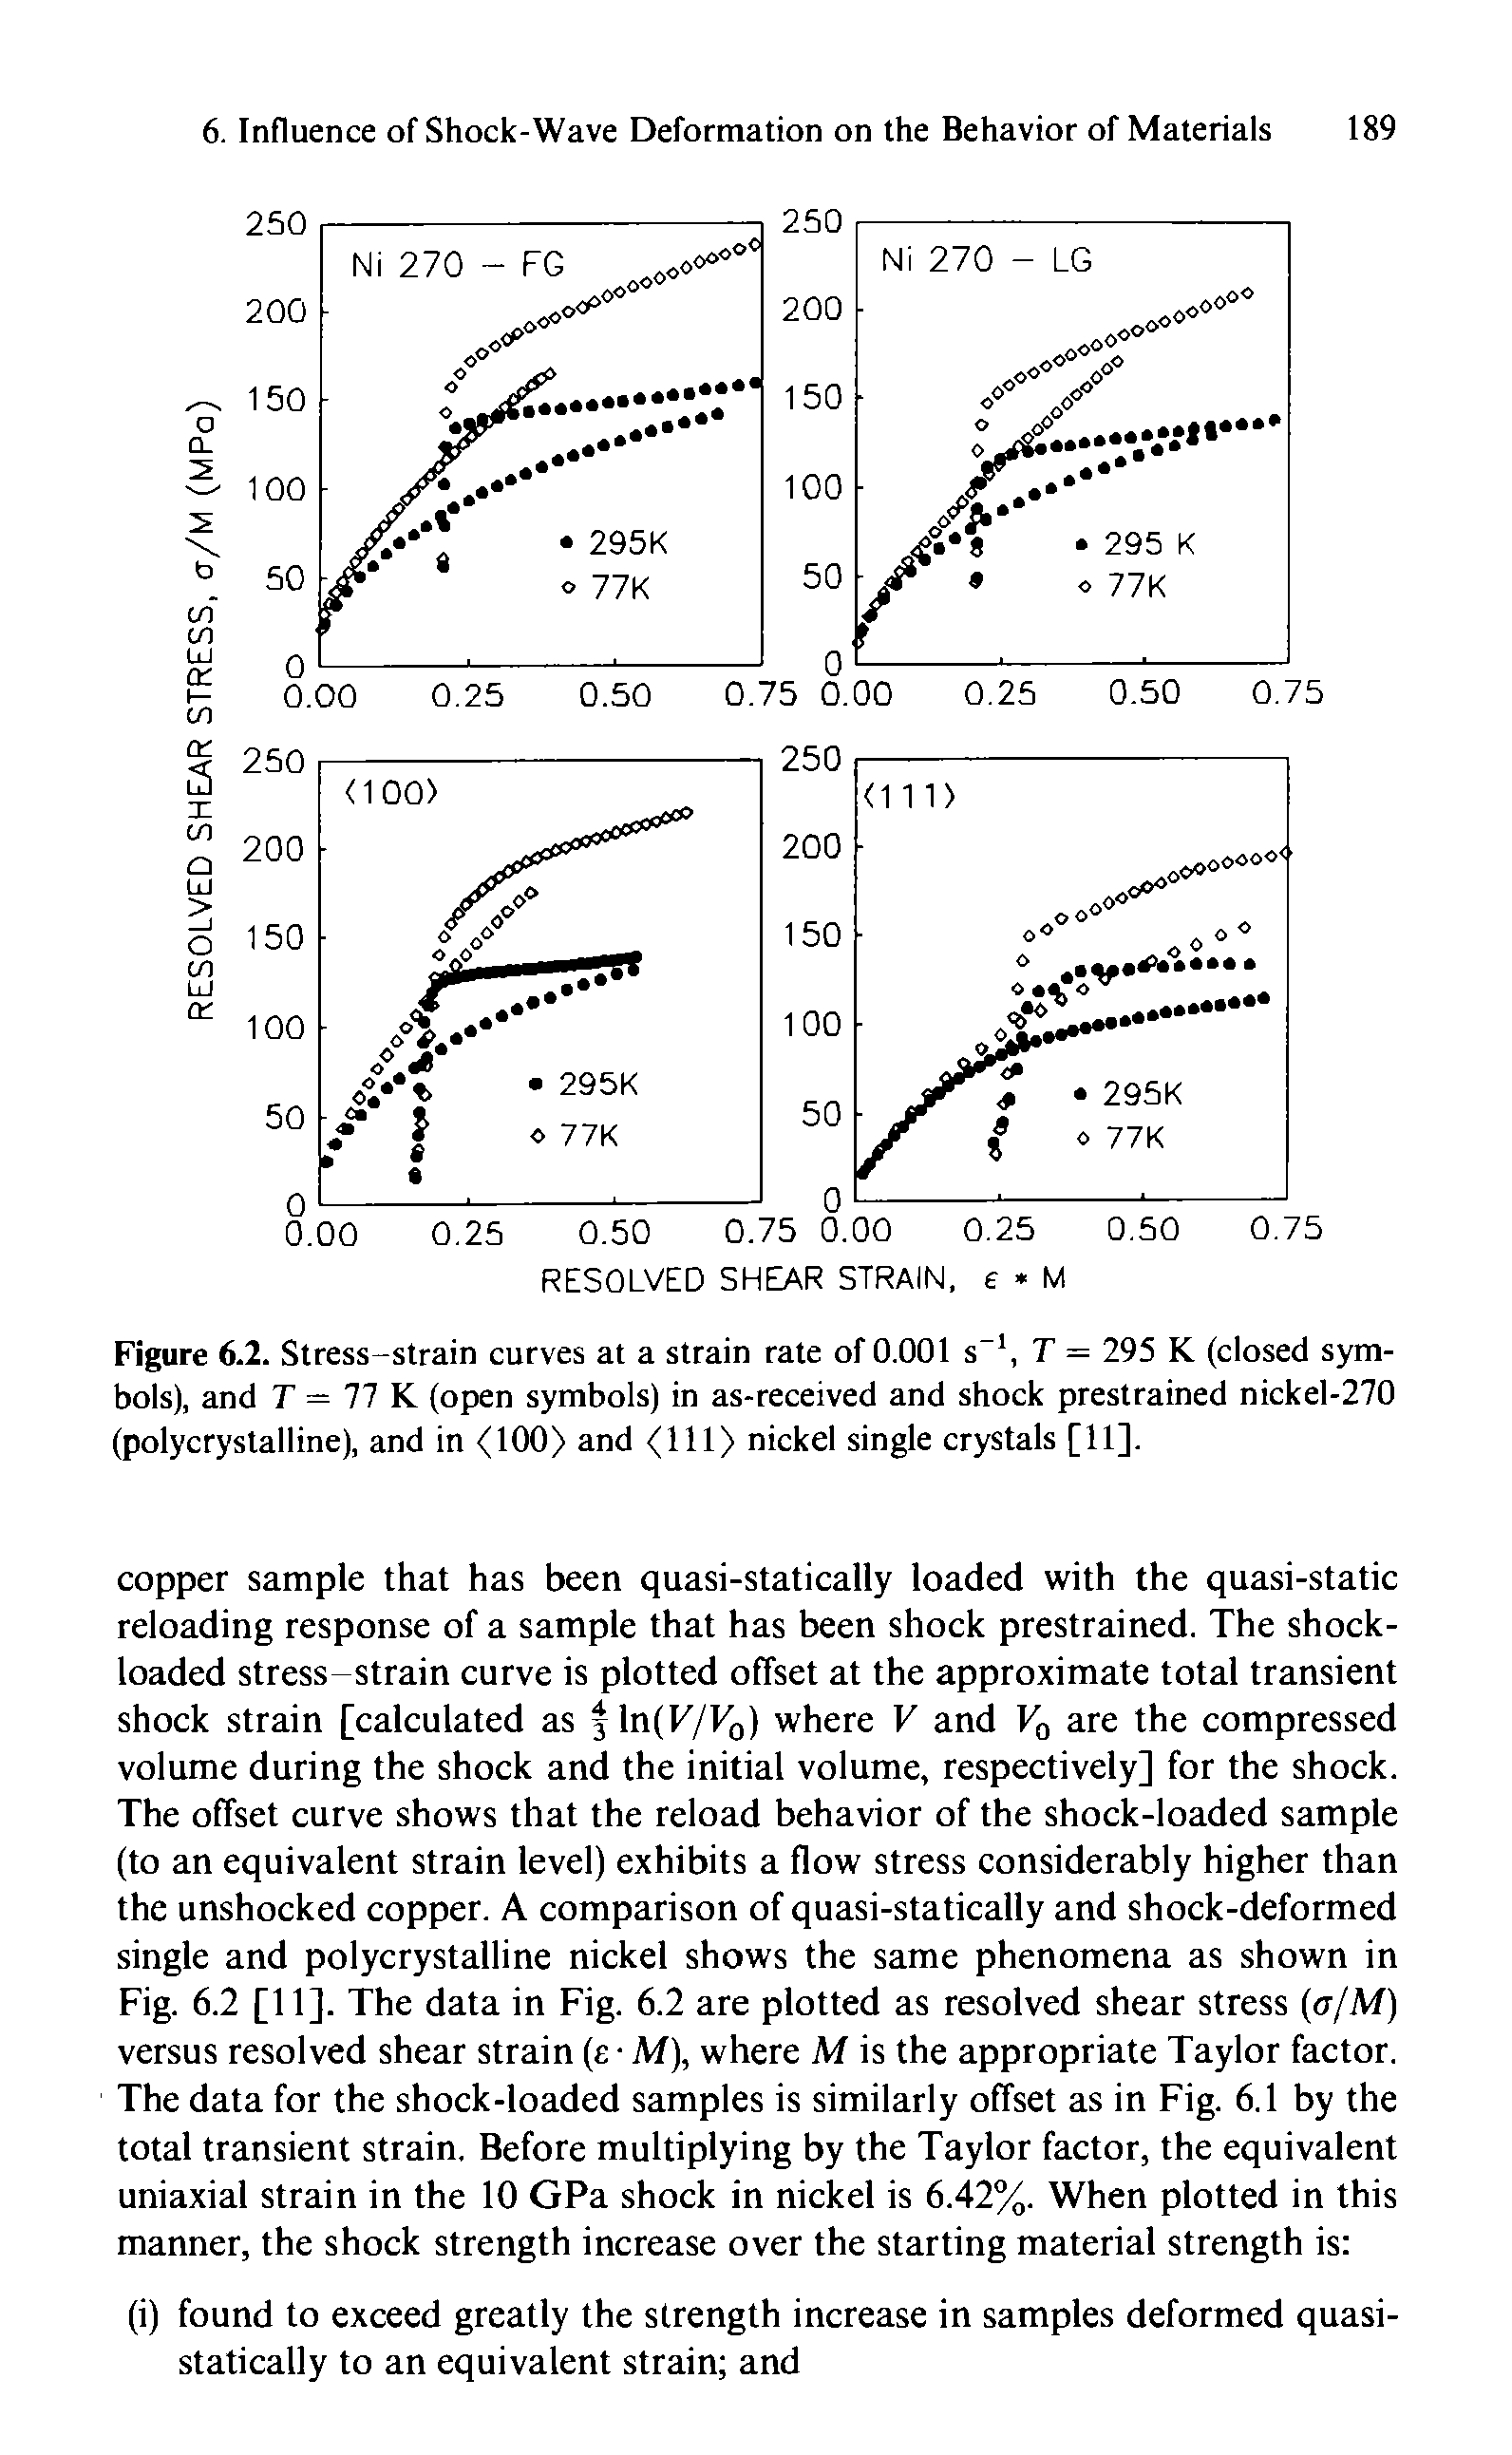 Figure 6.2. Stress-strain curves at a strain rate of 0.001 s T = 295 K (closed symbols), and T —11 K. (open symbols) in as-received and shock prestrained nickel-270 (polycrystalline), and in <100> and <111> nickel single crystals [11].